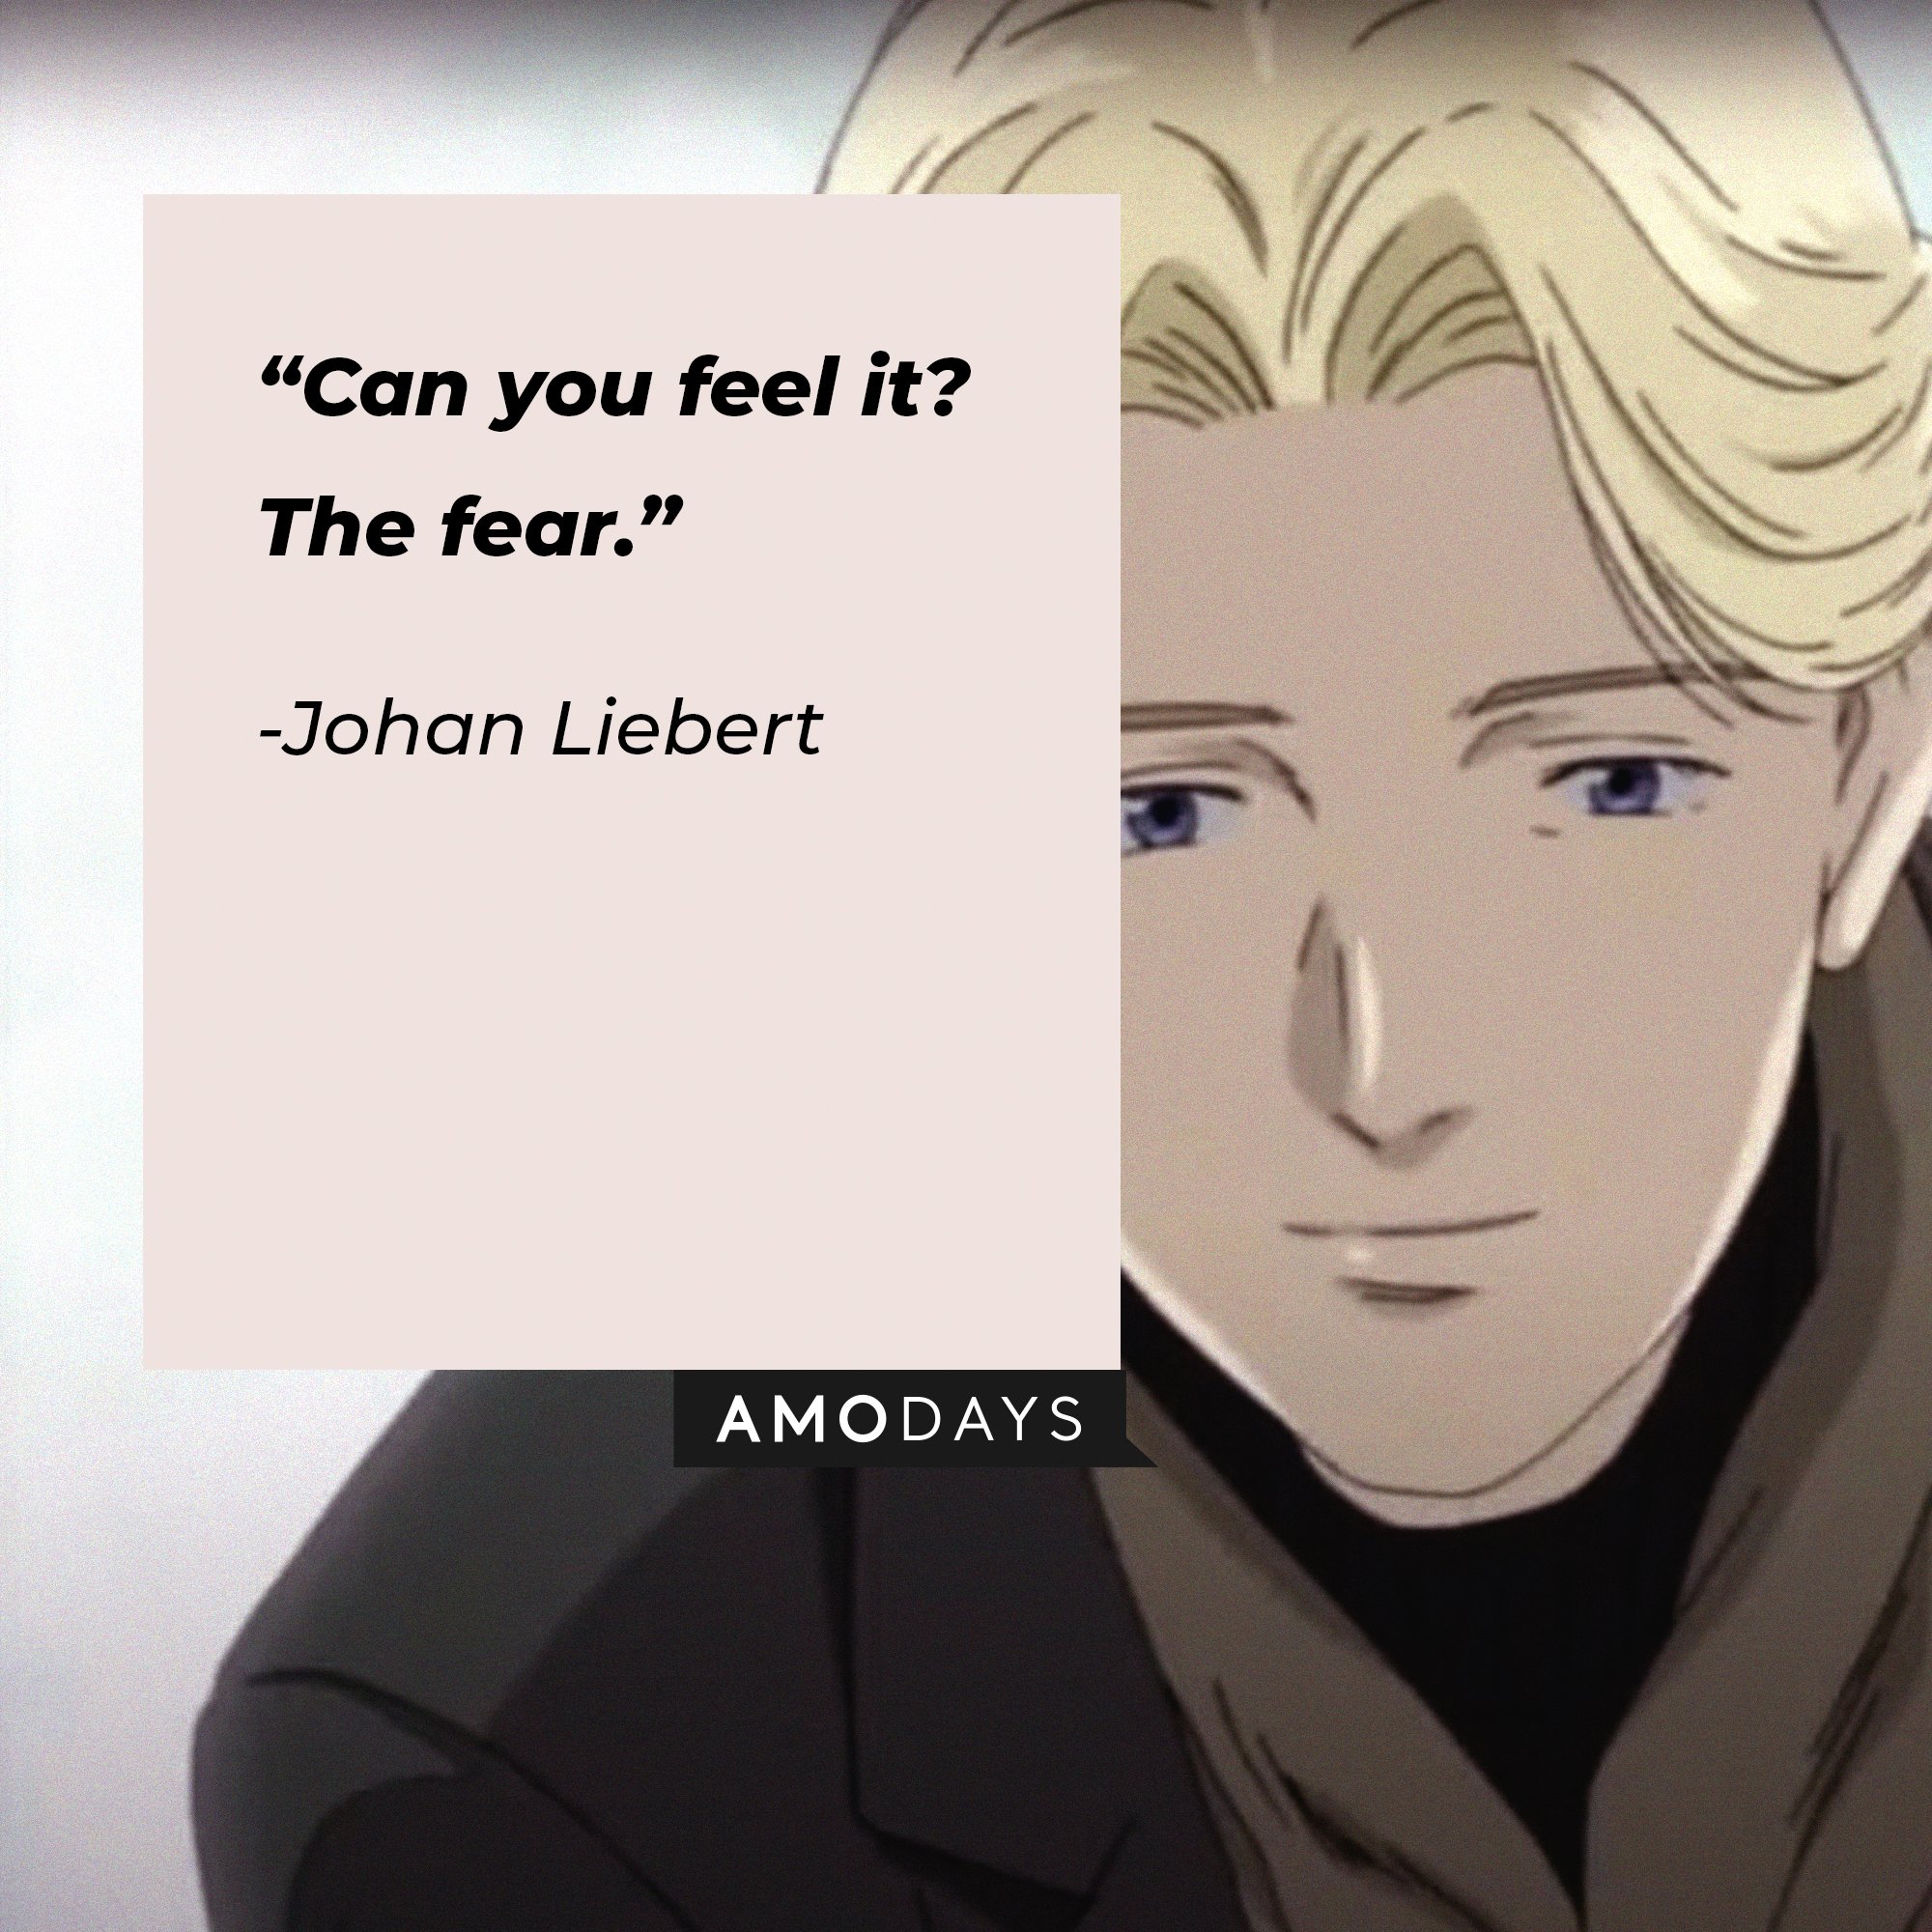 Johan Liebert’s quote: “Can you feel it? The fear.” | Image: AmoDays